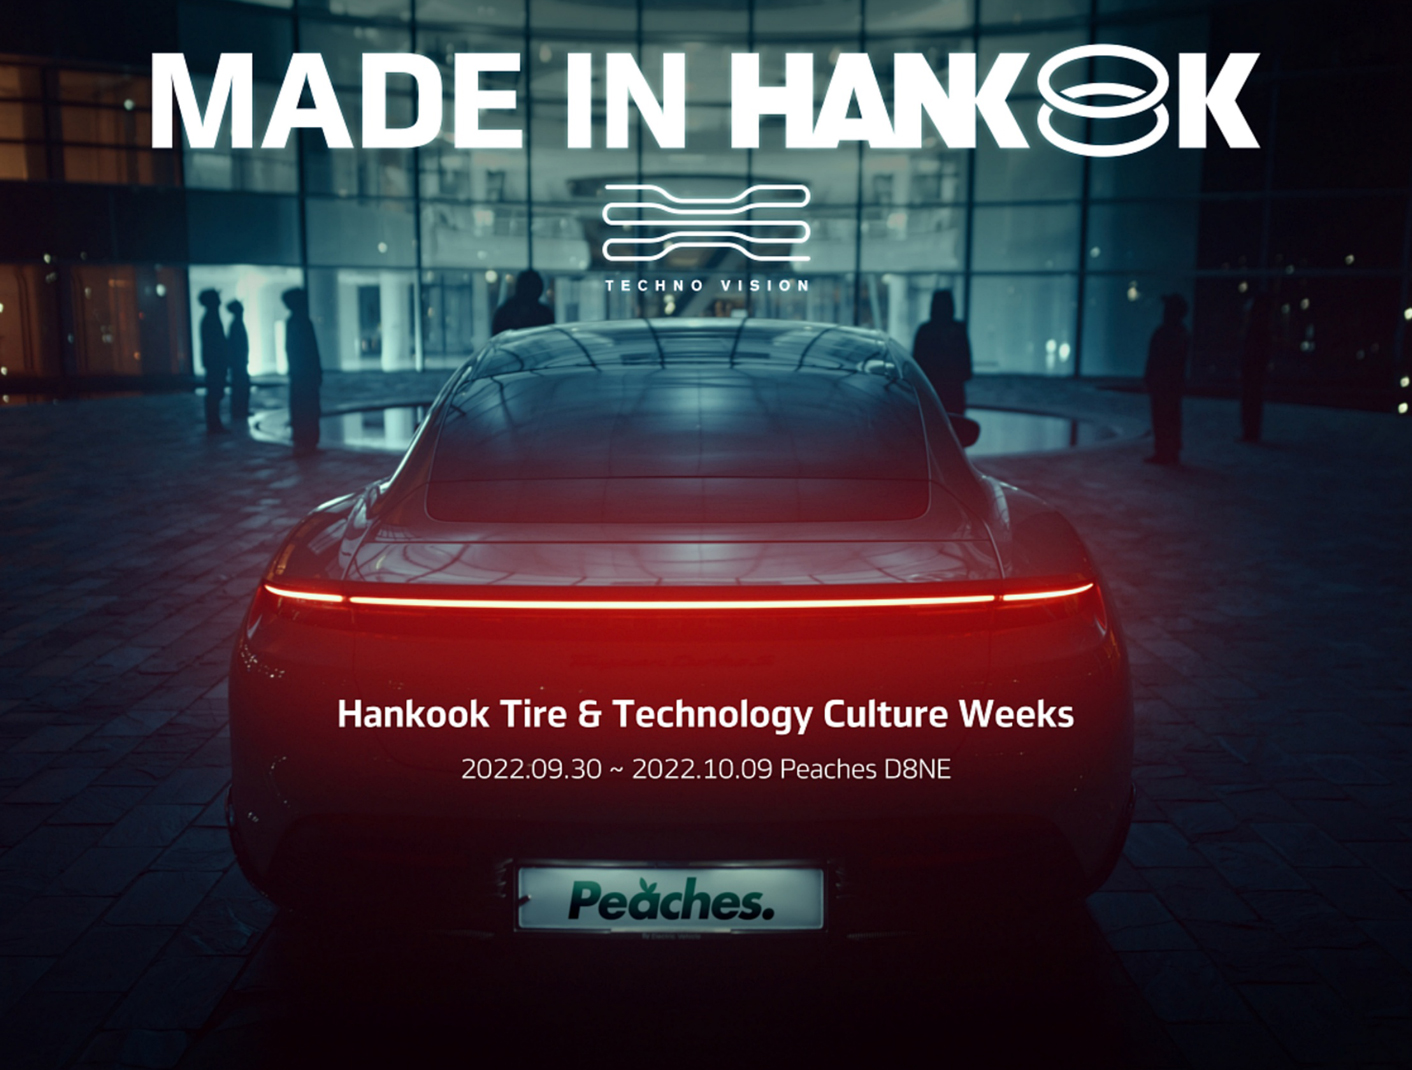 ‘MADE IN HANKOOK 2022’ by Hankook Tire underway to connect with Gen Z and Millennials